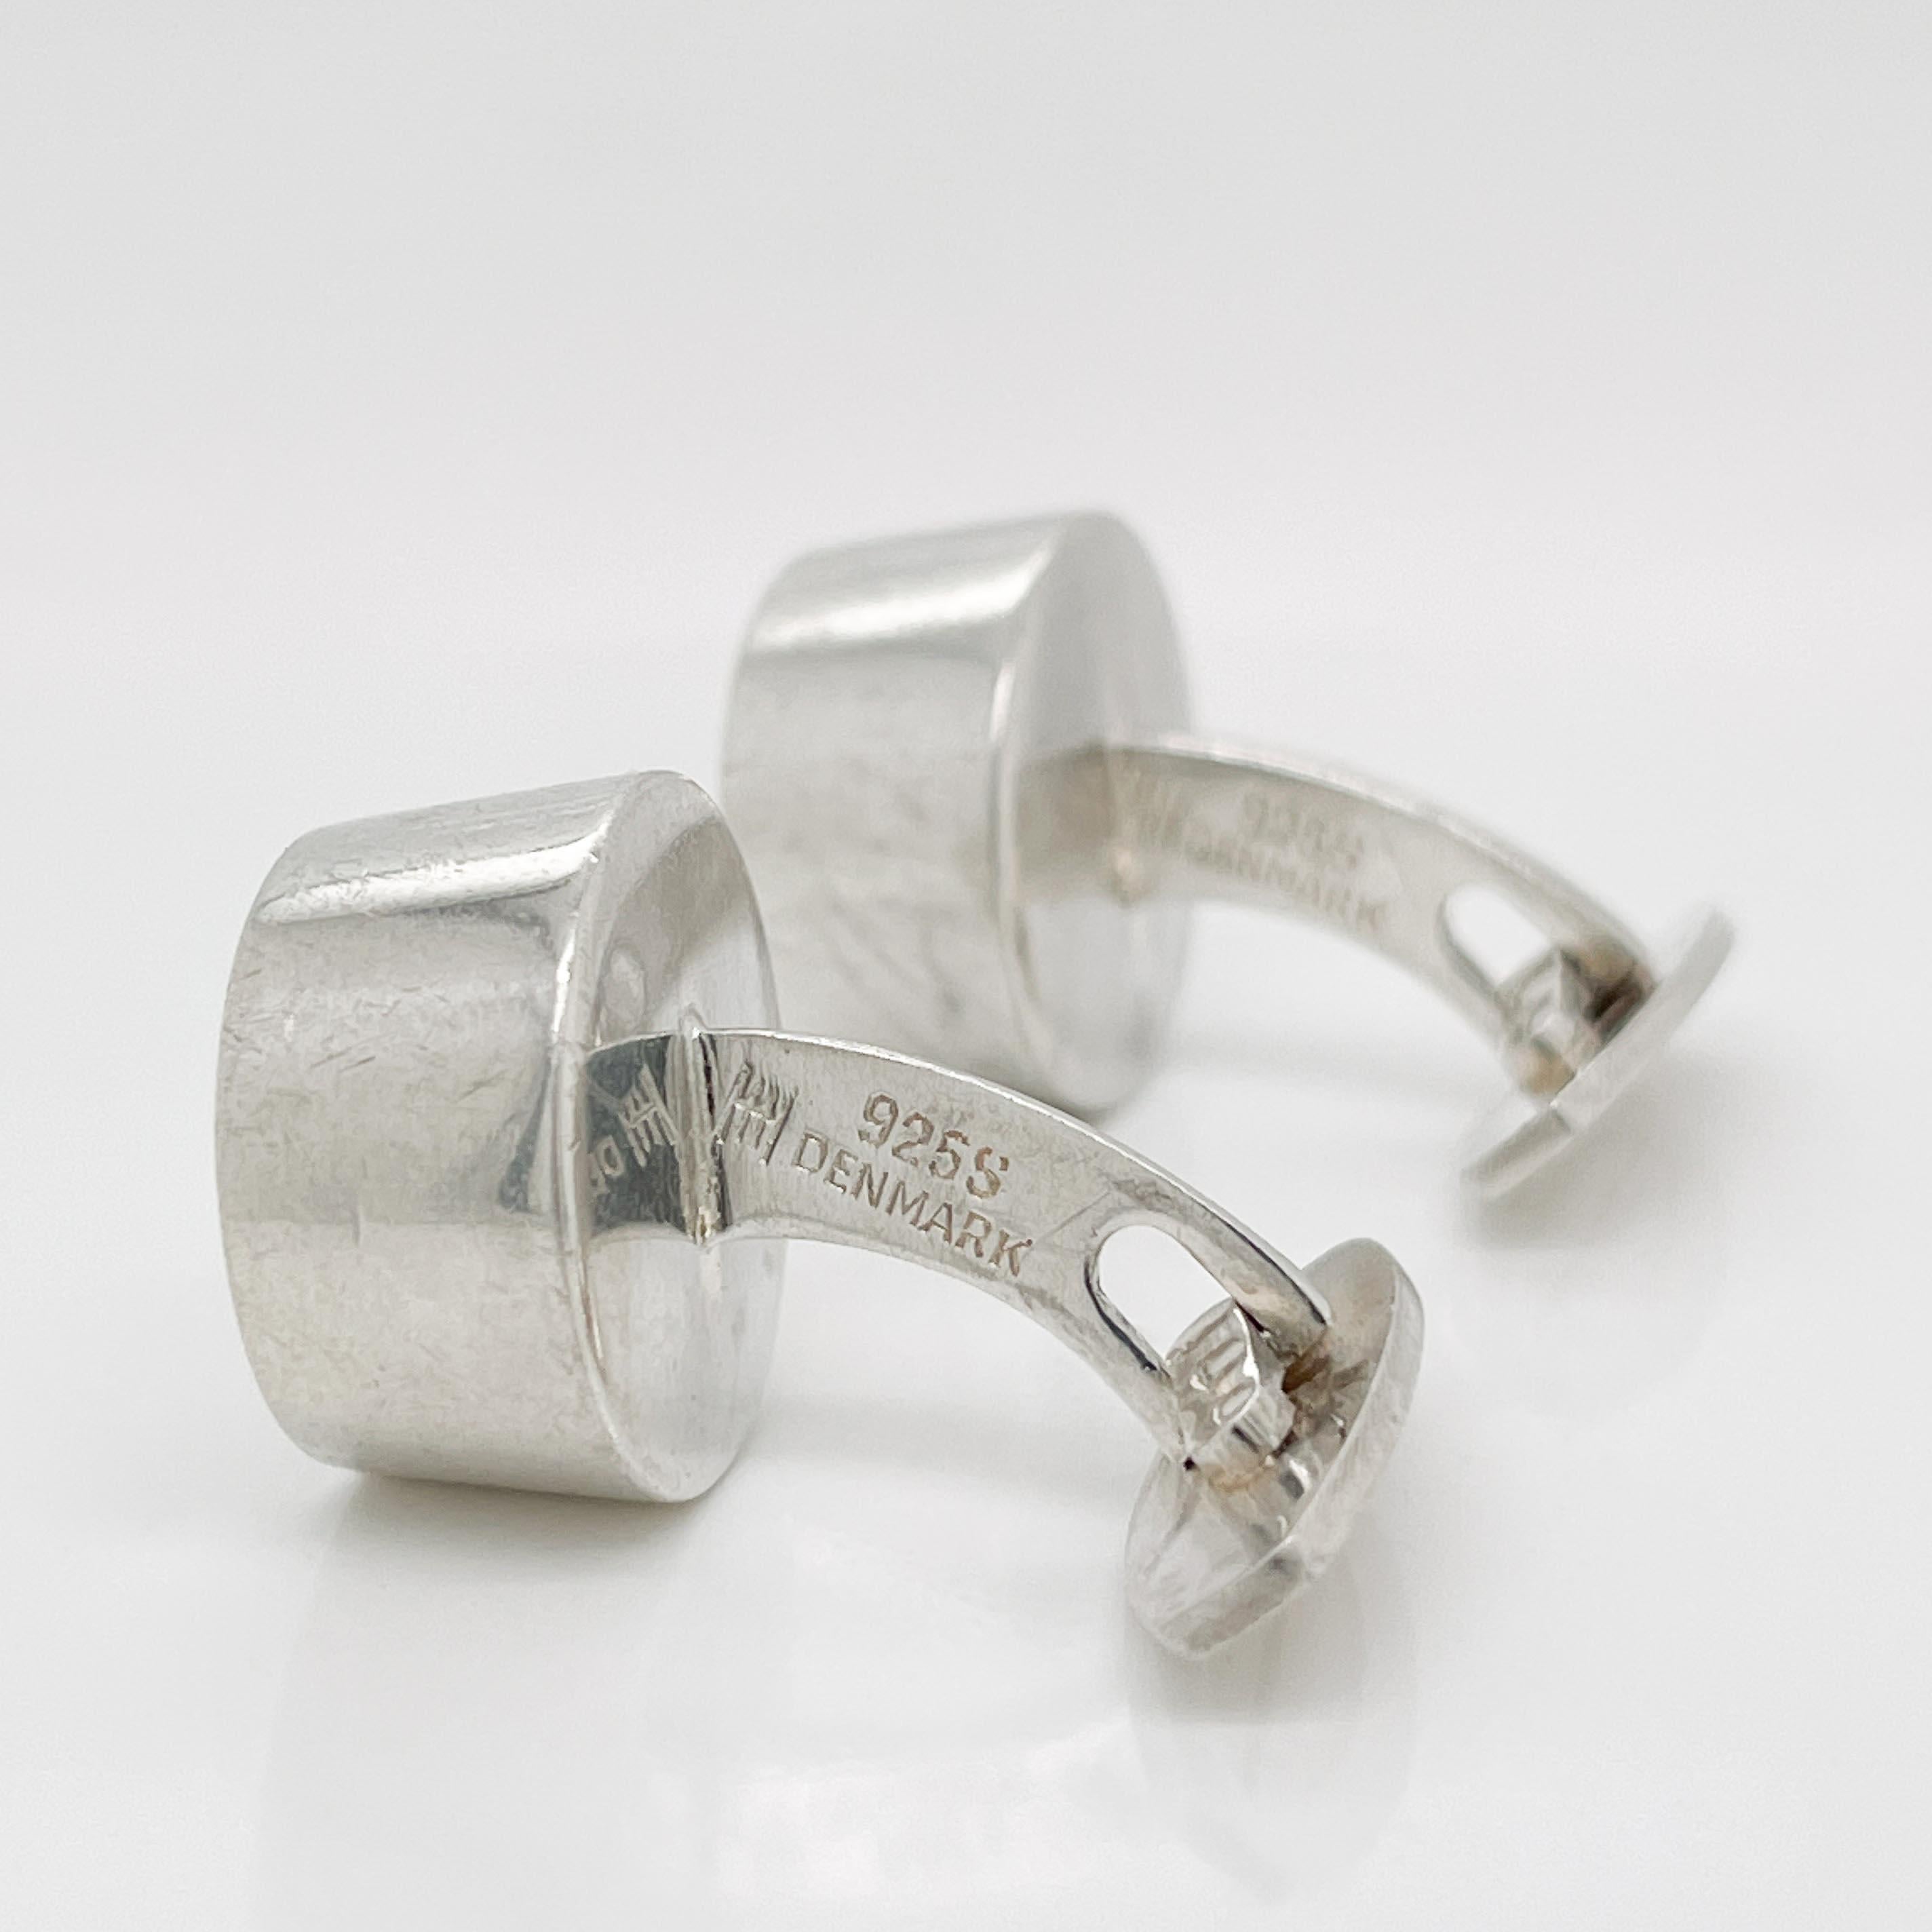 A fine pair of Mid-Century Modern cufflinks.

In sterling silver. 

By Hans Hansen. 

Model no. 642

With a button head, a fixed curved post, and a hinged catch.

Simply a wonderful pair of cufflinks from one of Denmark's masters!

Date:
Mid-20th